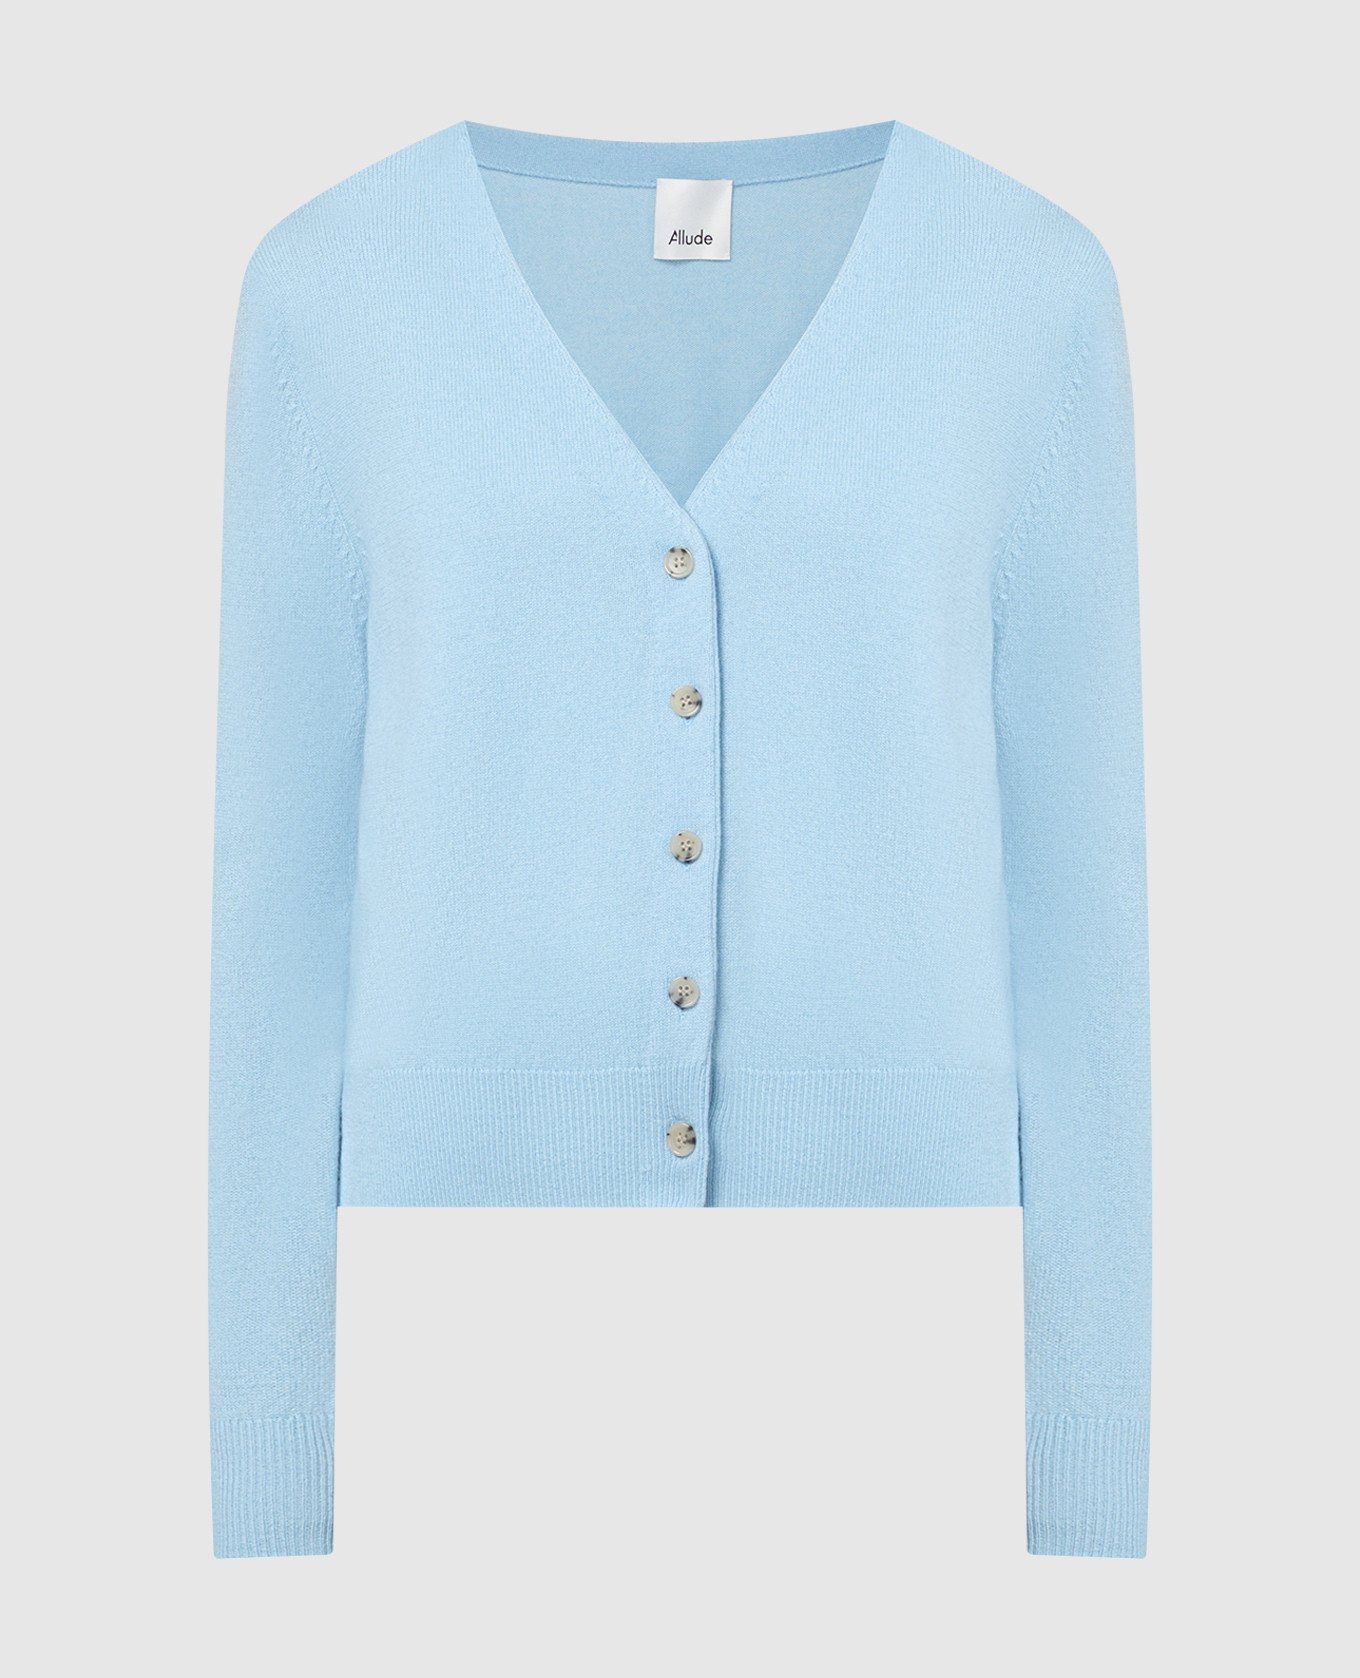 Blue wool and cashmere cardigan